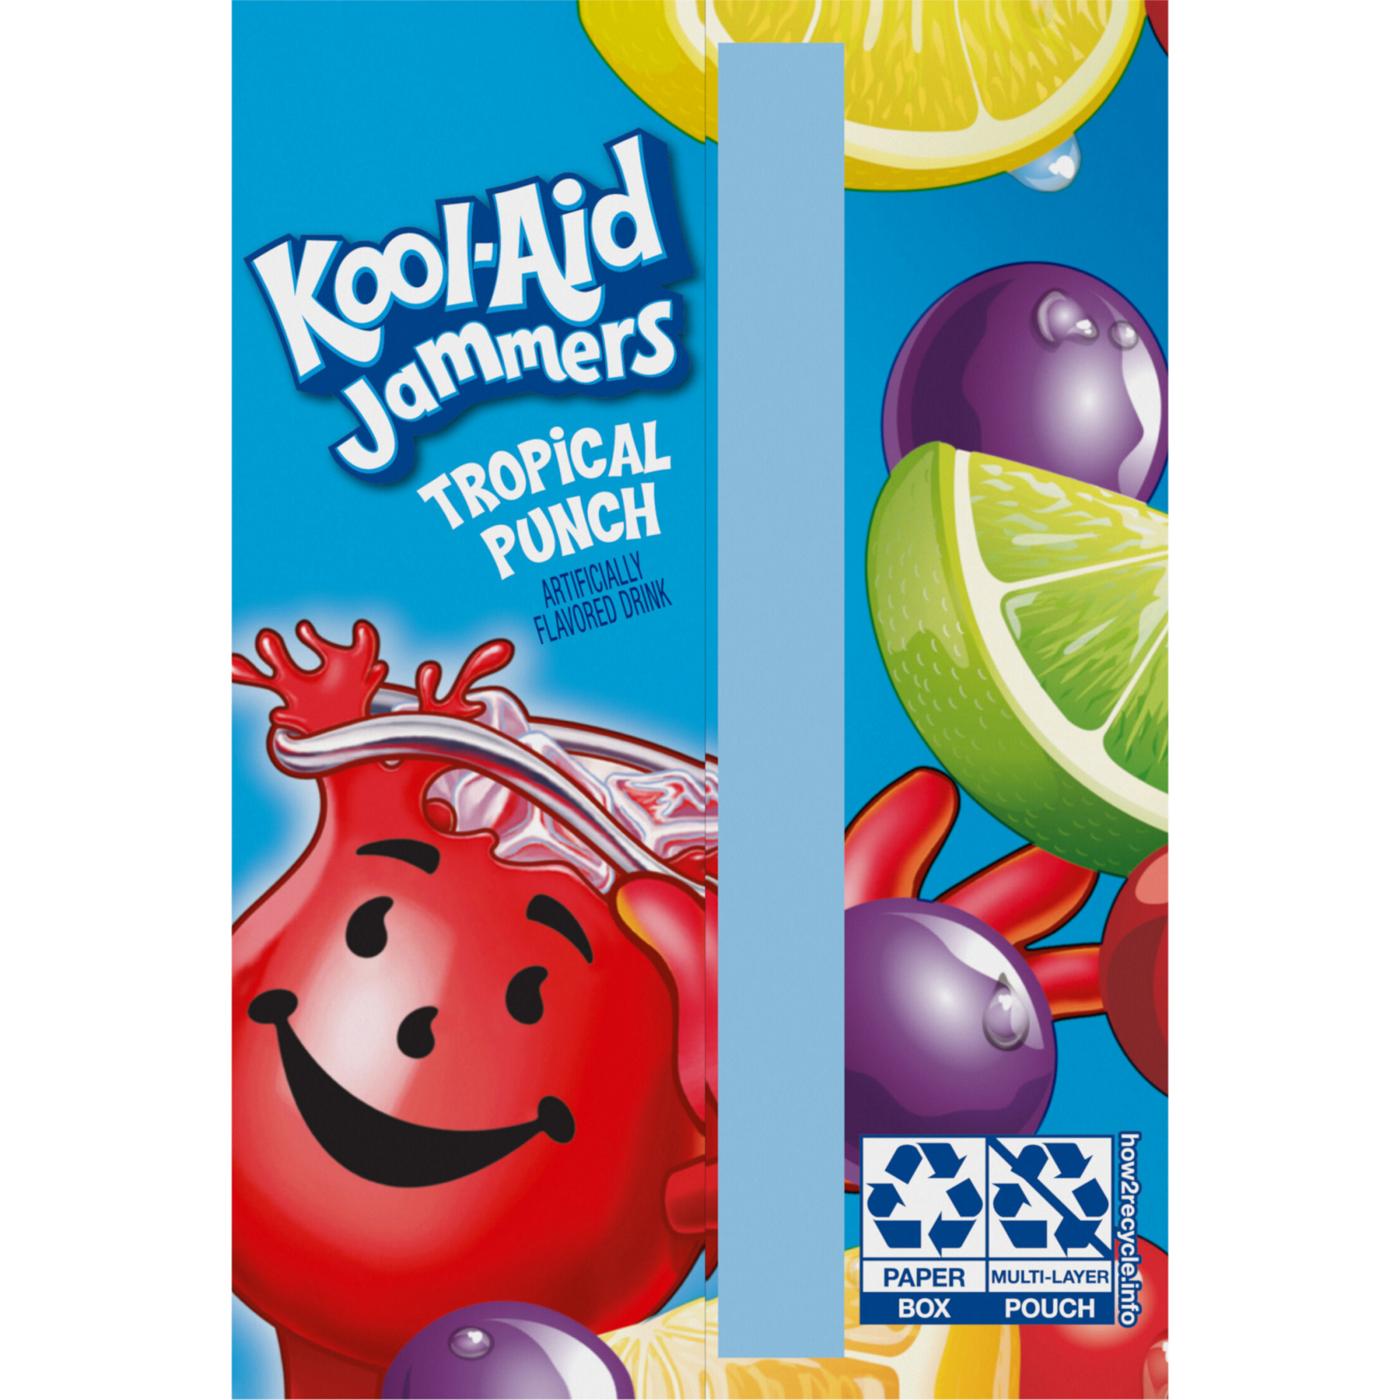 Kool-Aid Jammers Tropical Punch Flavored Drink 6 oz Pouches; image 2 of 9